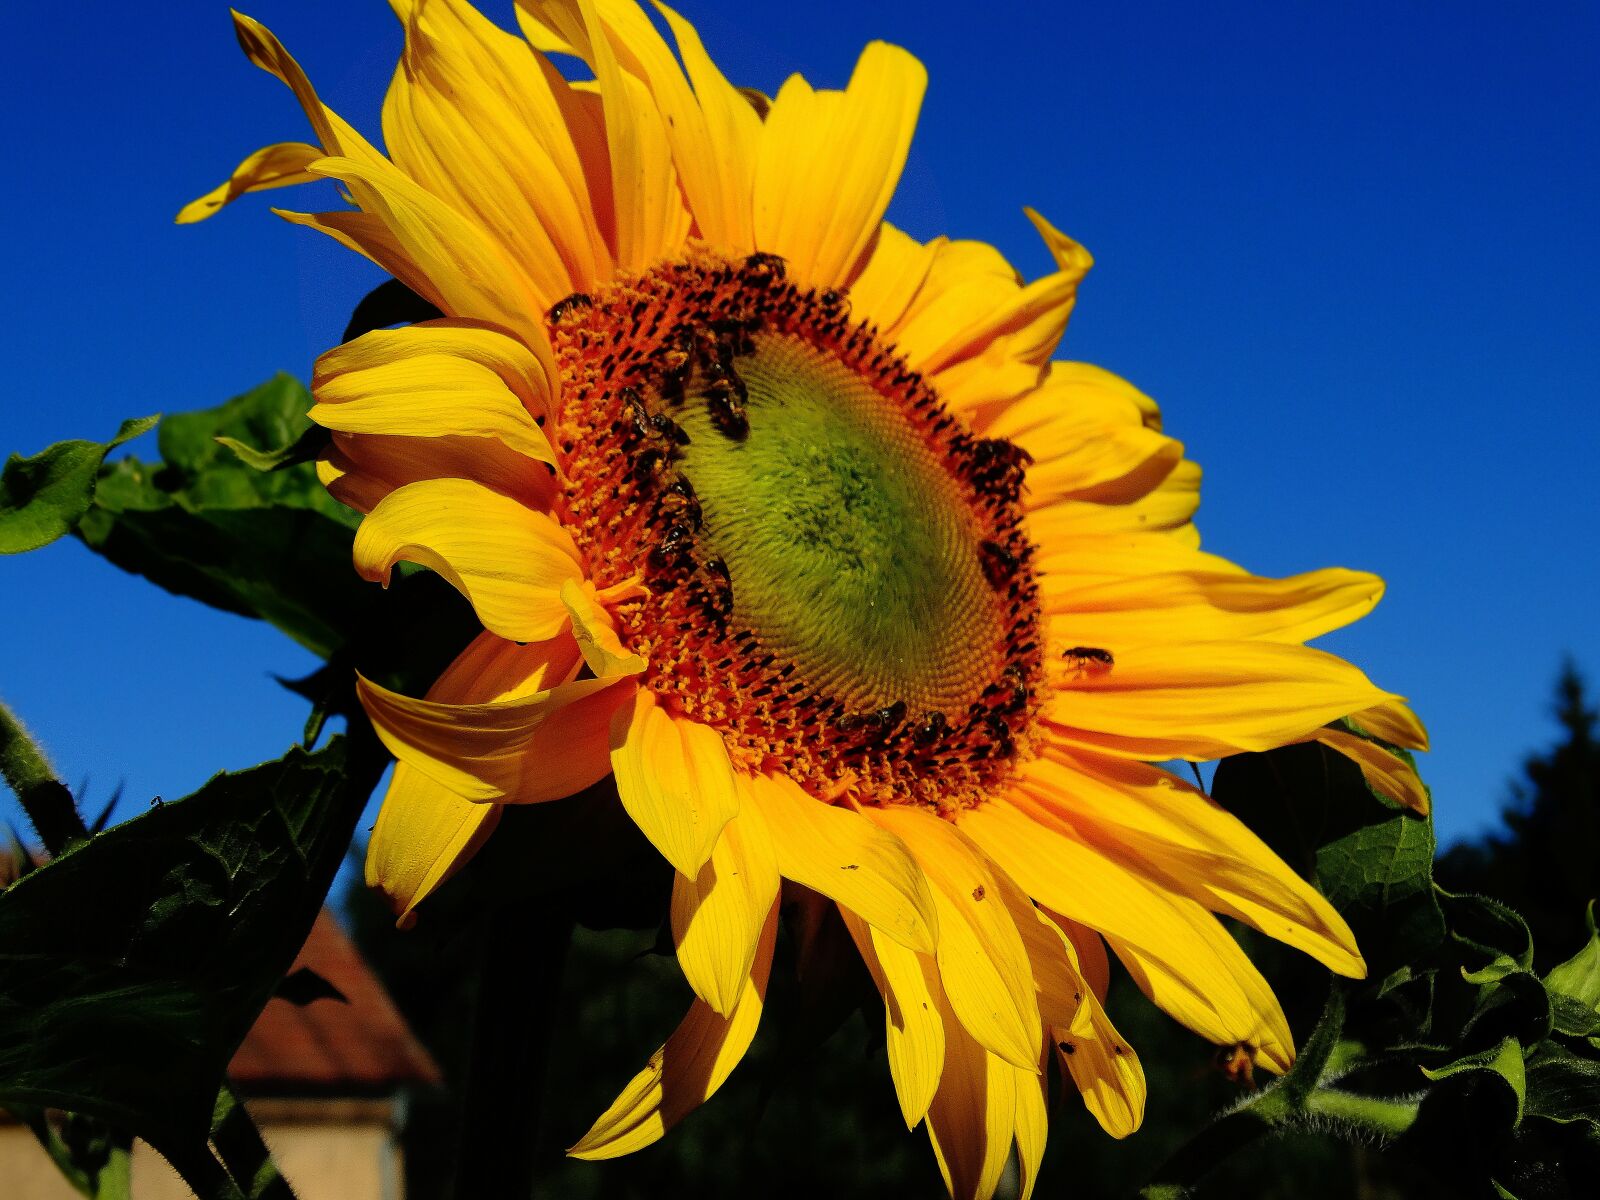 Sony Cyber-shot DSC-HX300 sample photo. Summer, sunflower, insect photography